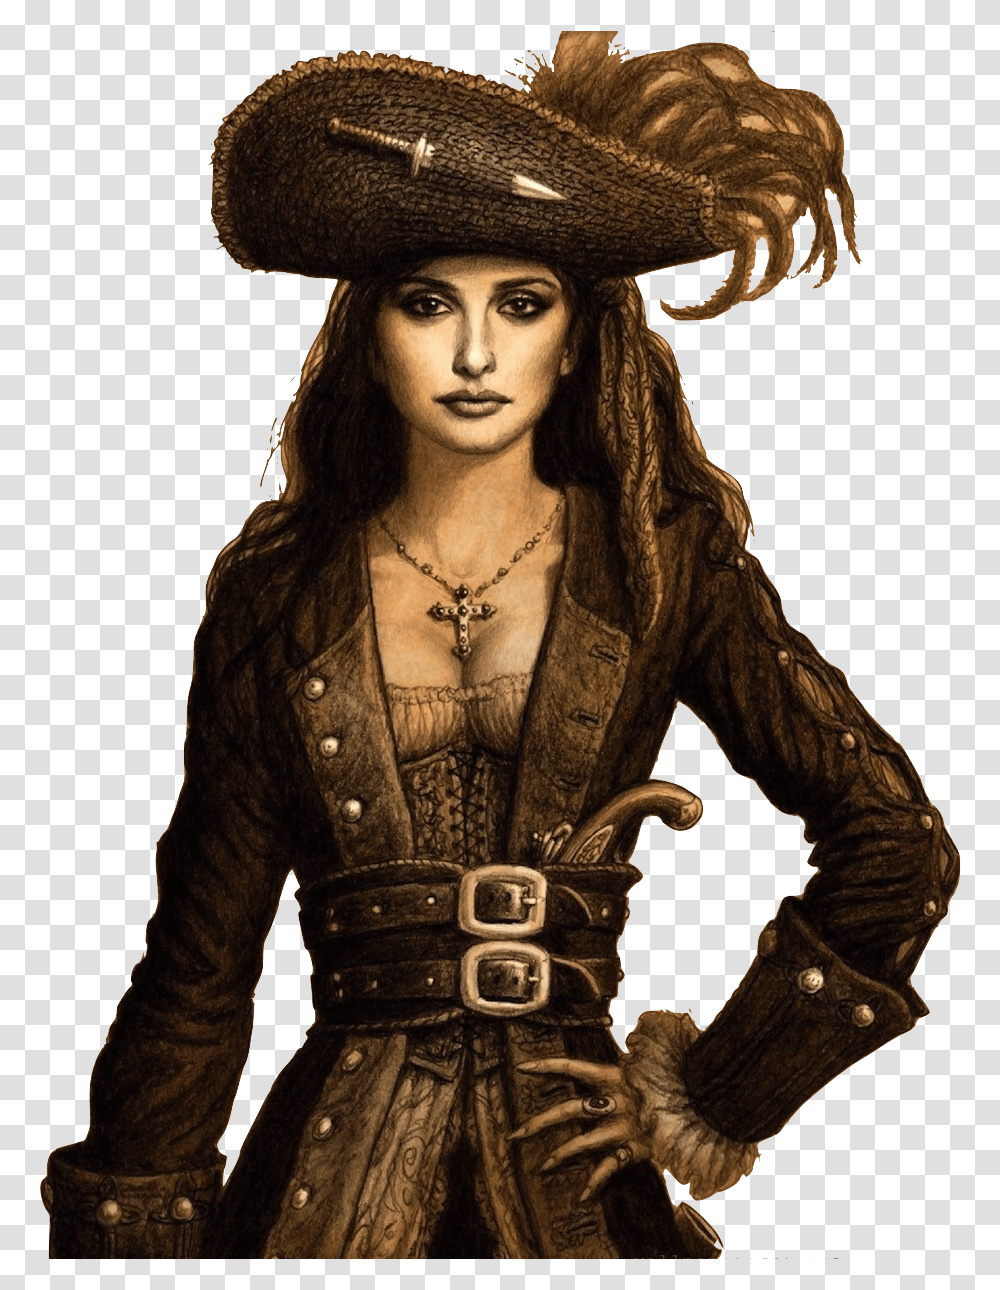 Download Pirate Image For Free Anne Bonny Pirates Of The Caribbean, Clothing, Apparel, Hat, Person Transparent Png